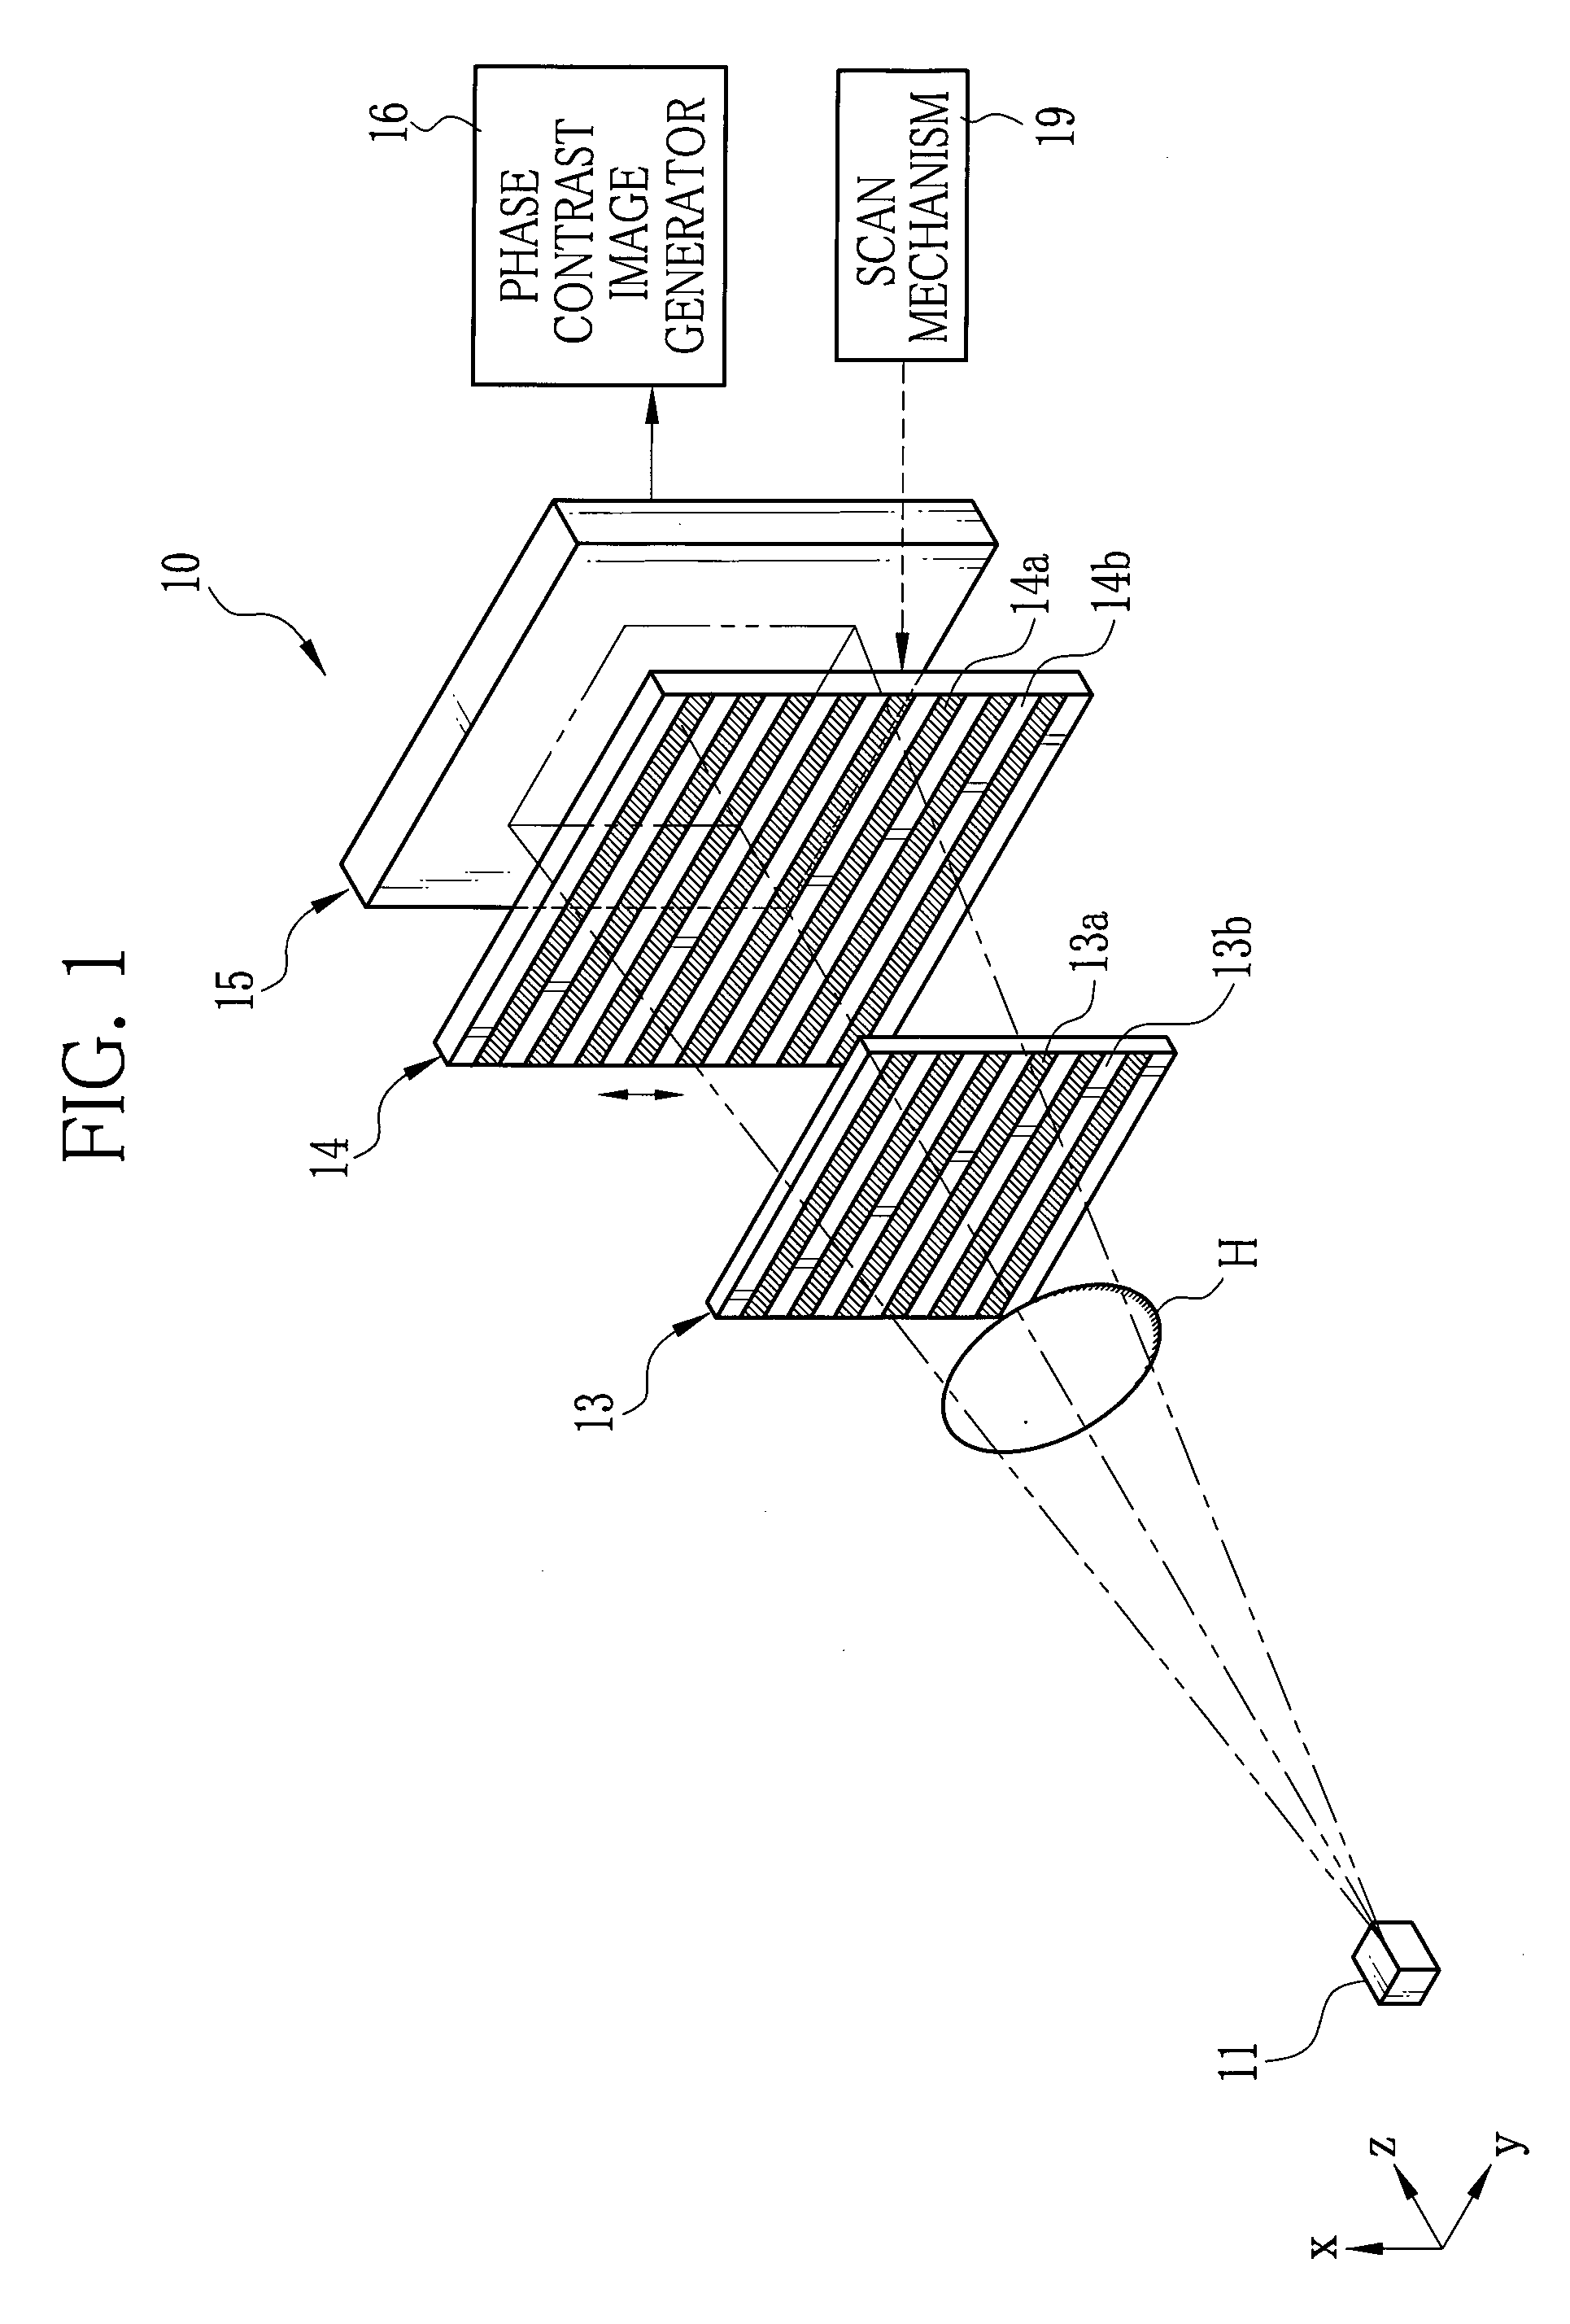 Grid for radiation imaging and method for producing the same